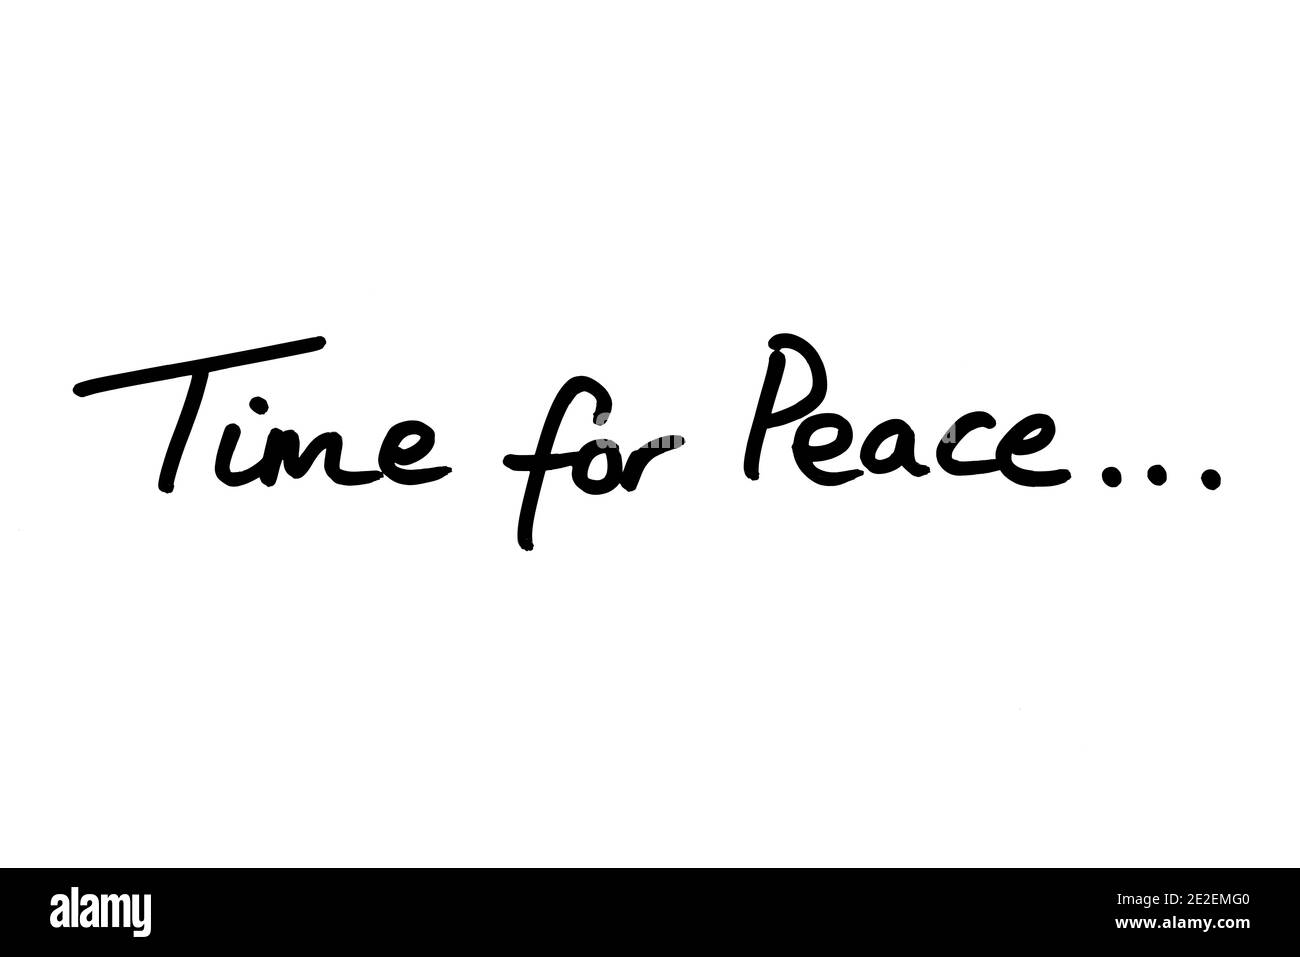 Time for Peace… handwritten on a white background. Stock Photo